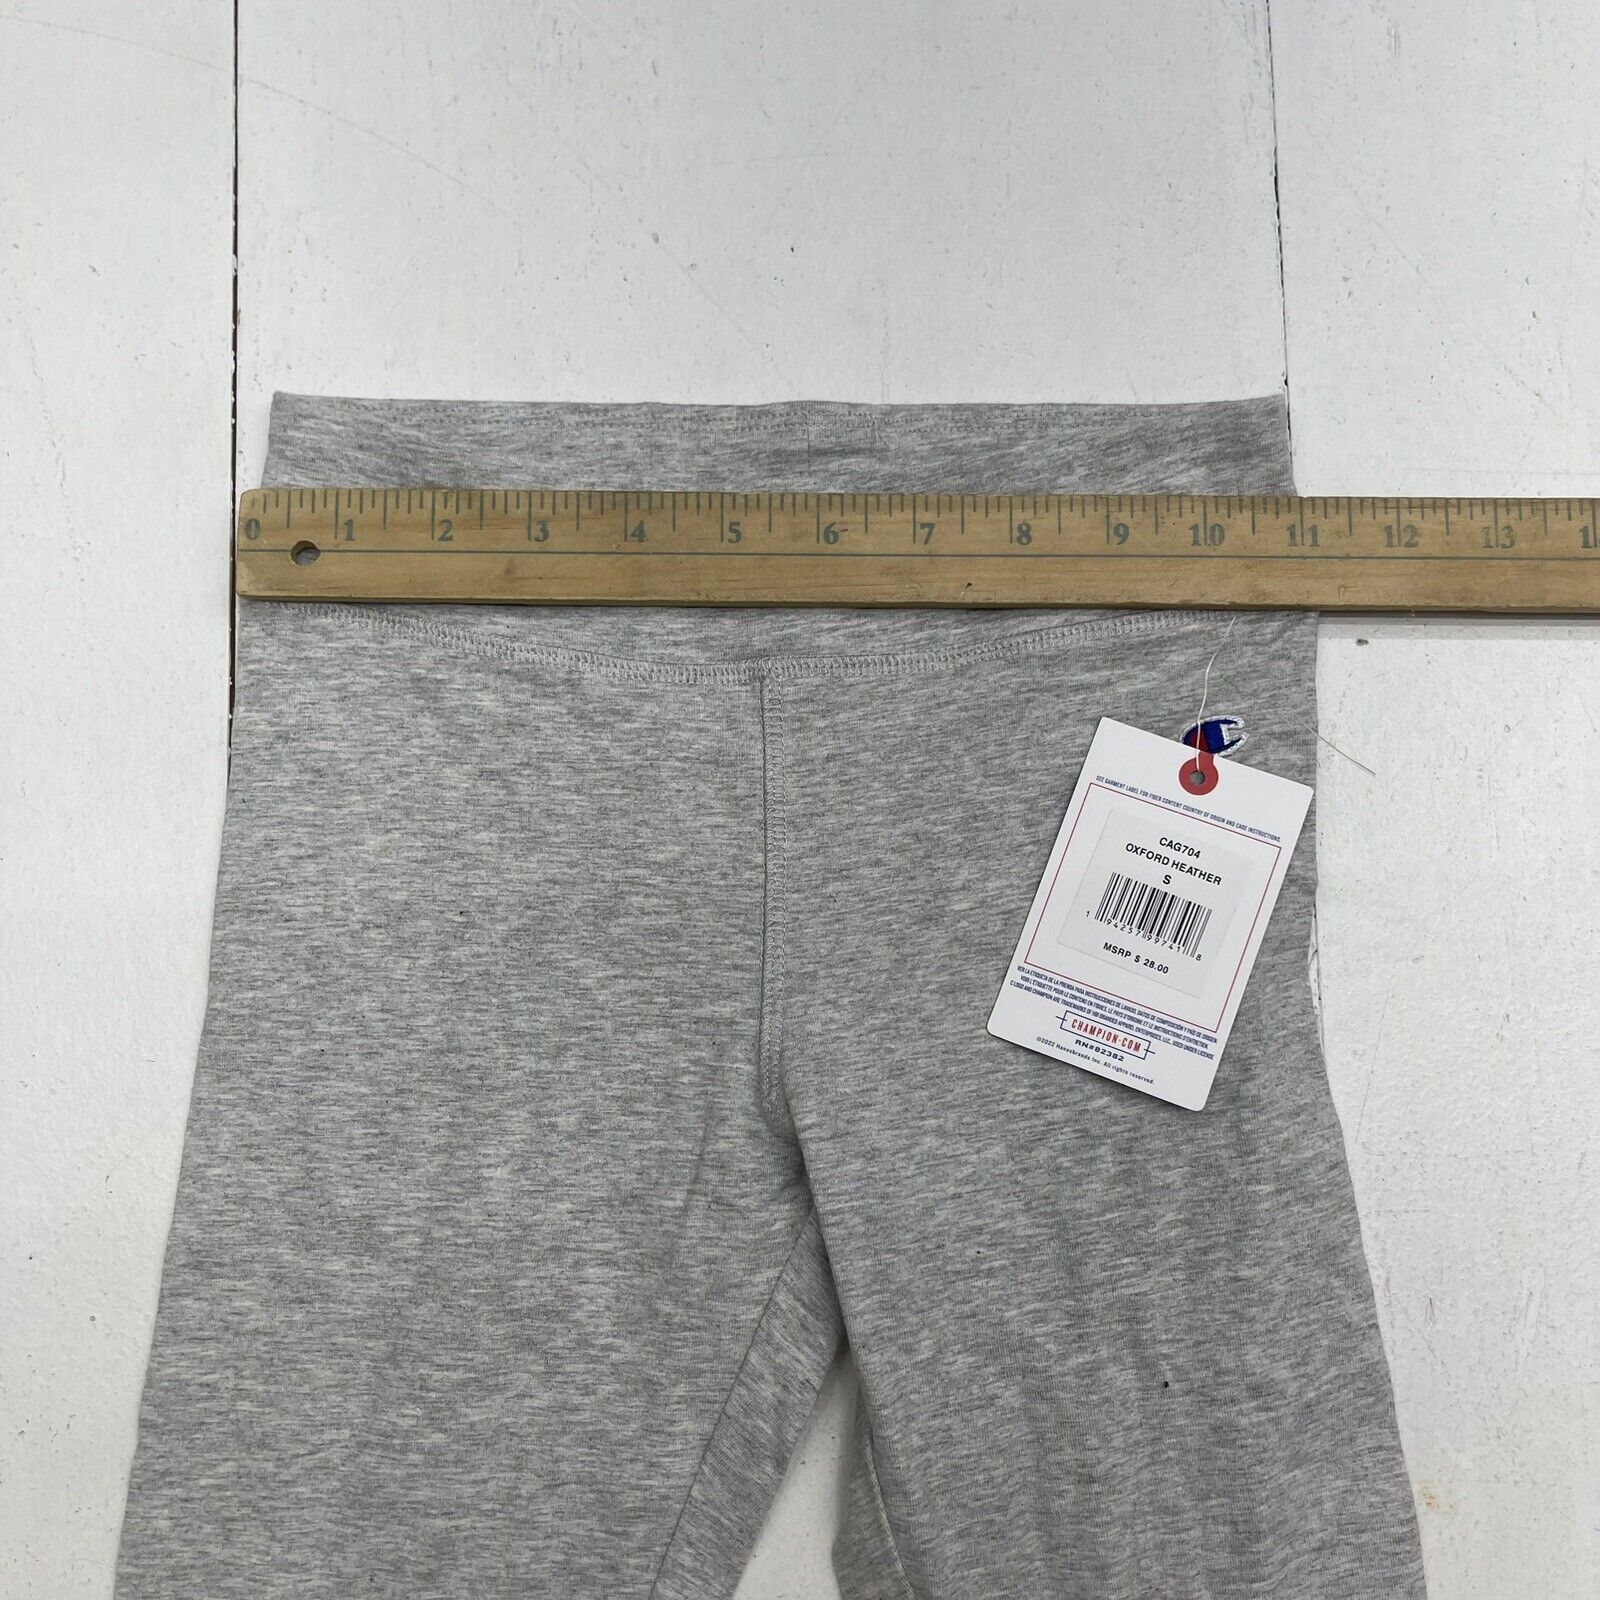 Champion Oxford Heather Grey Spellout Leggings Youth Girls Small New